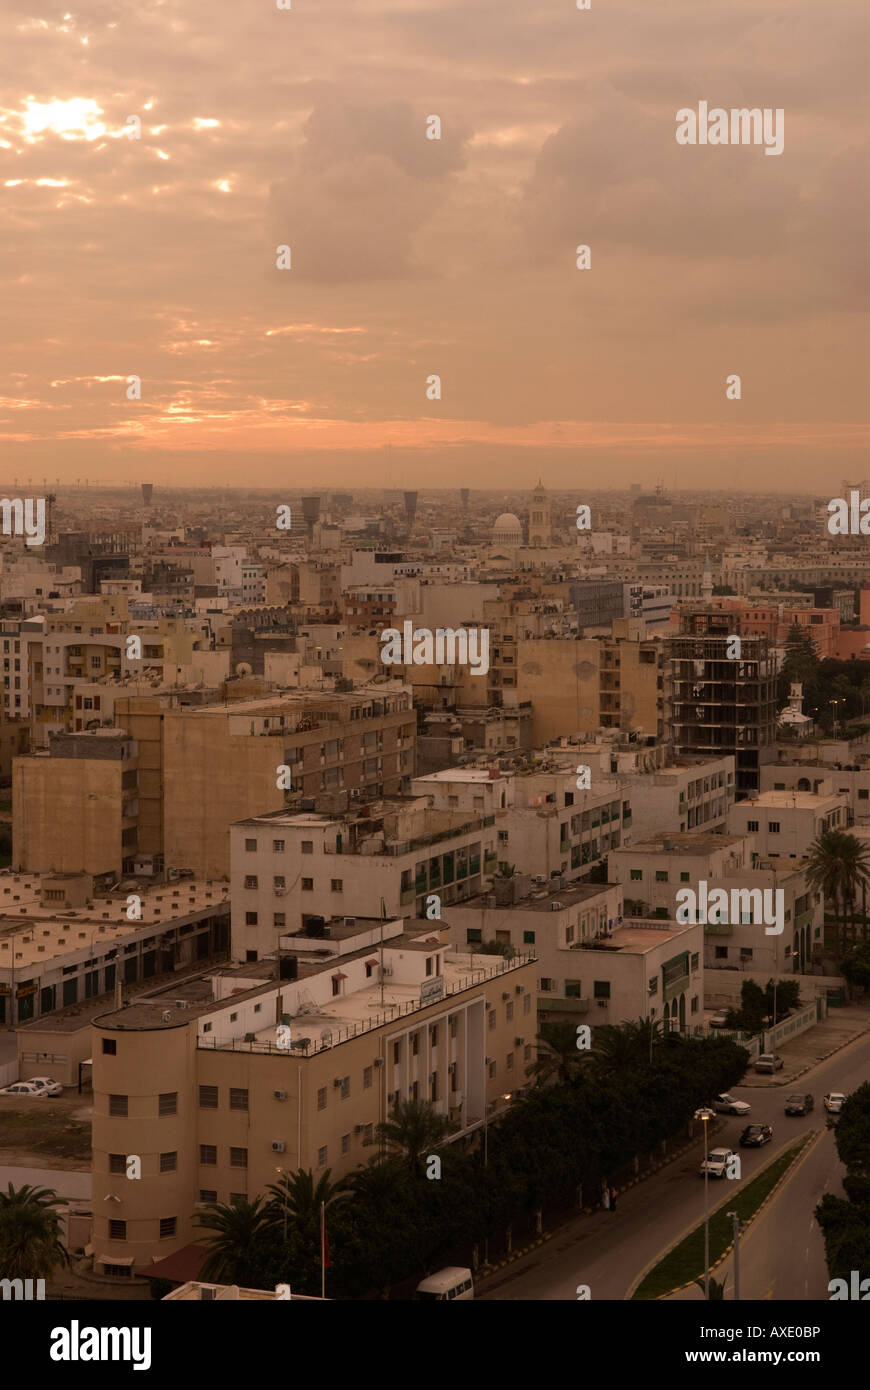 General view over the rooftops of the city of Tripoli, Libya, north Africa. Stock Photo